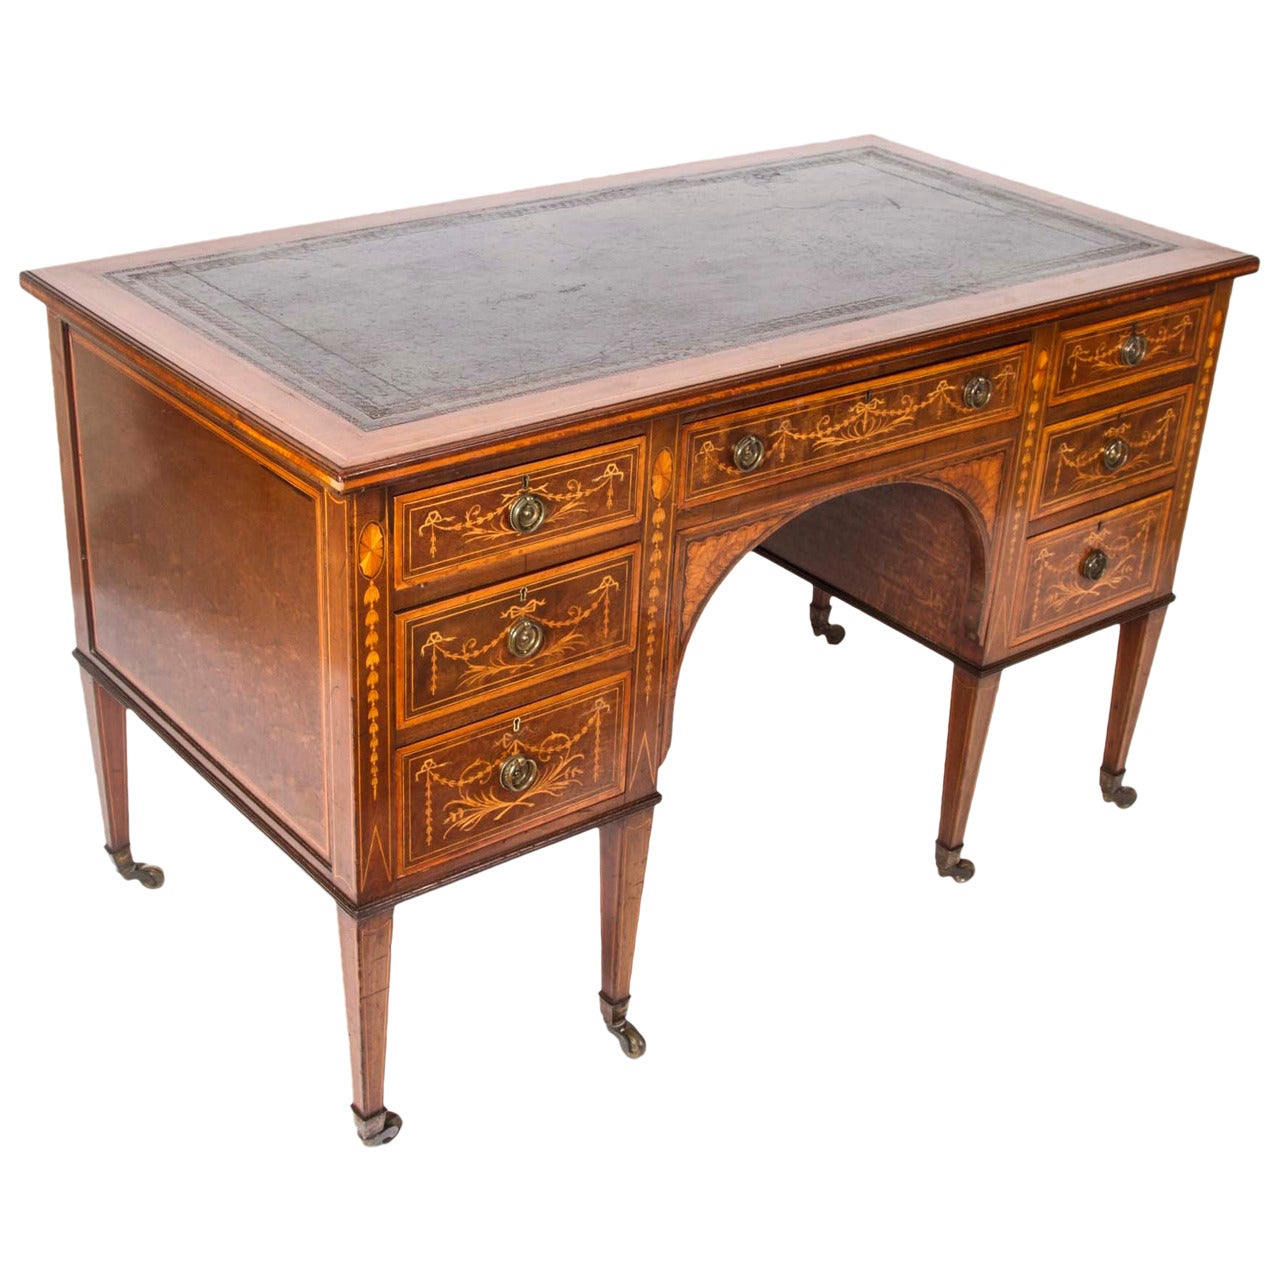 19th Century Edwardian Inlaid Desk, Bears "Shoolbred & Co." Stamp